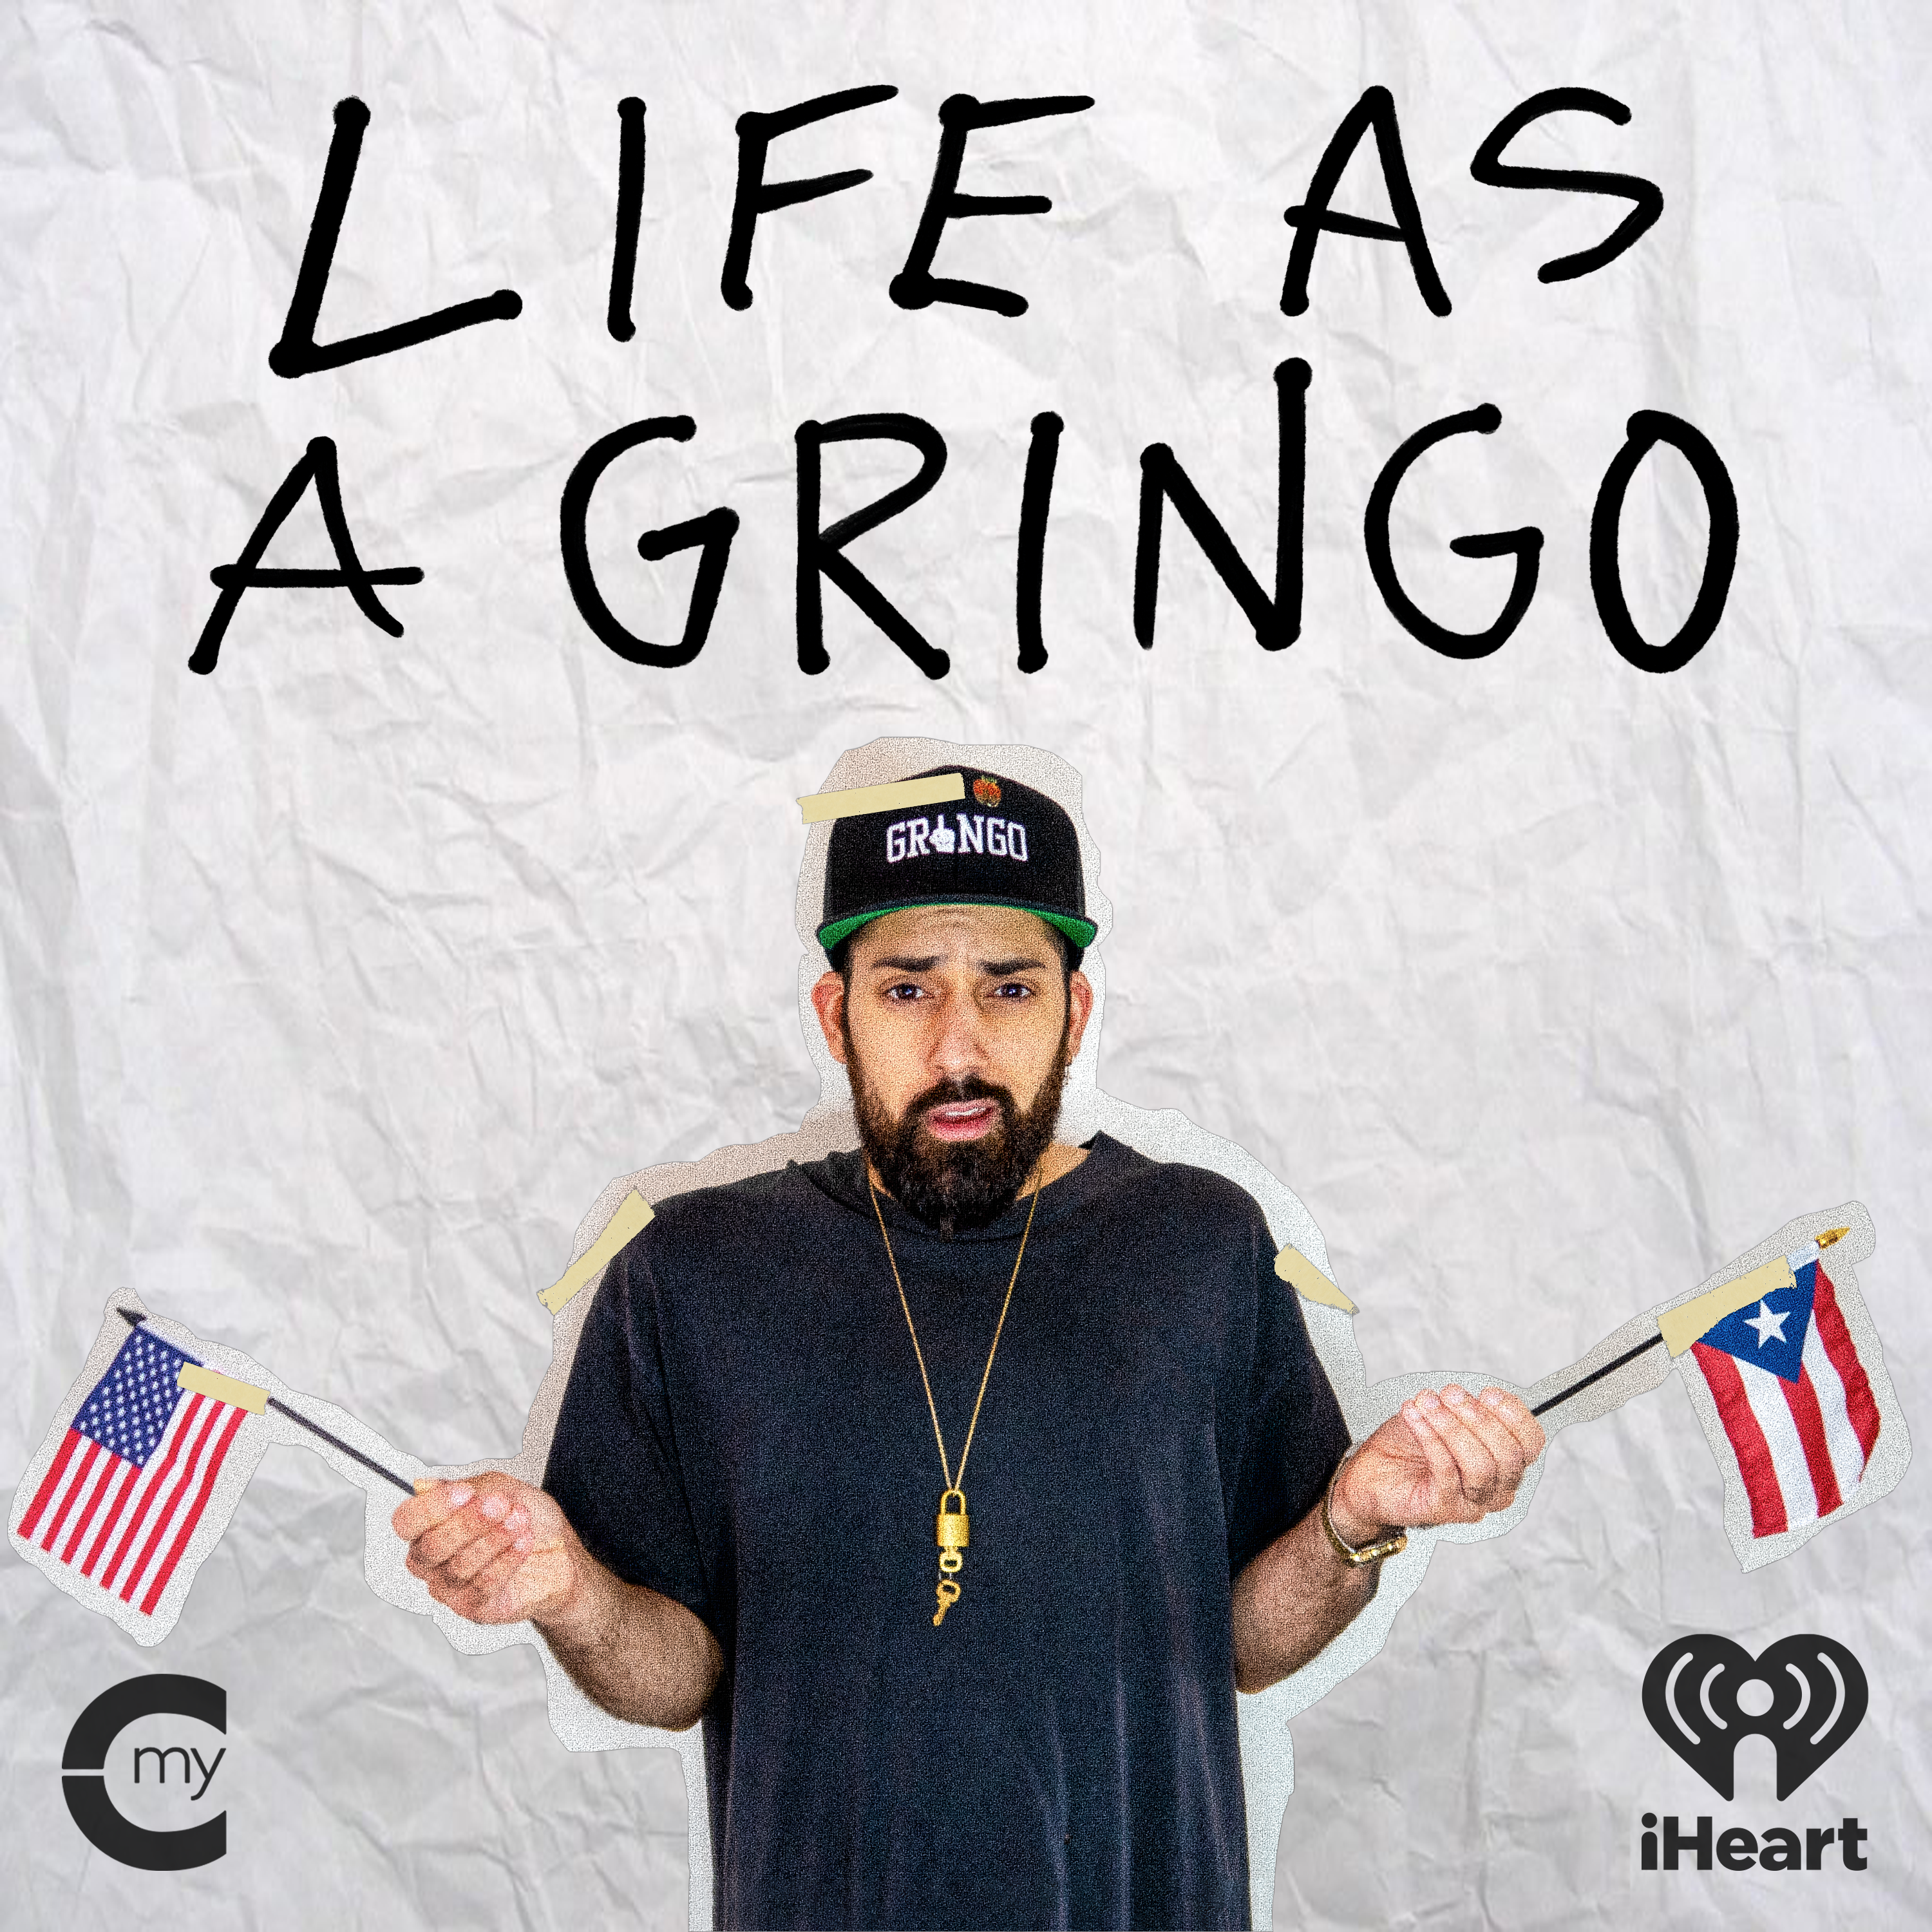 Gringo's Guide To: Internet Trolls & Being A Better Person In The Social Media Era